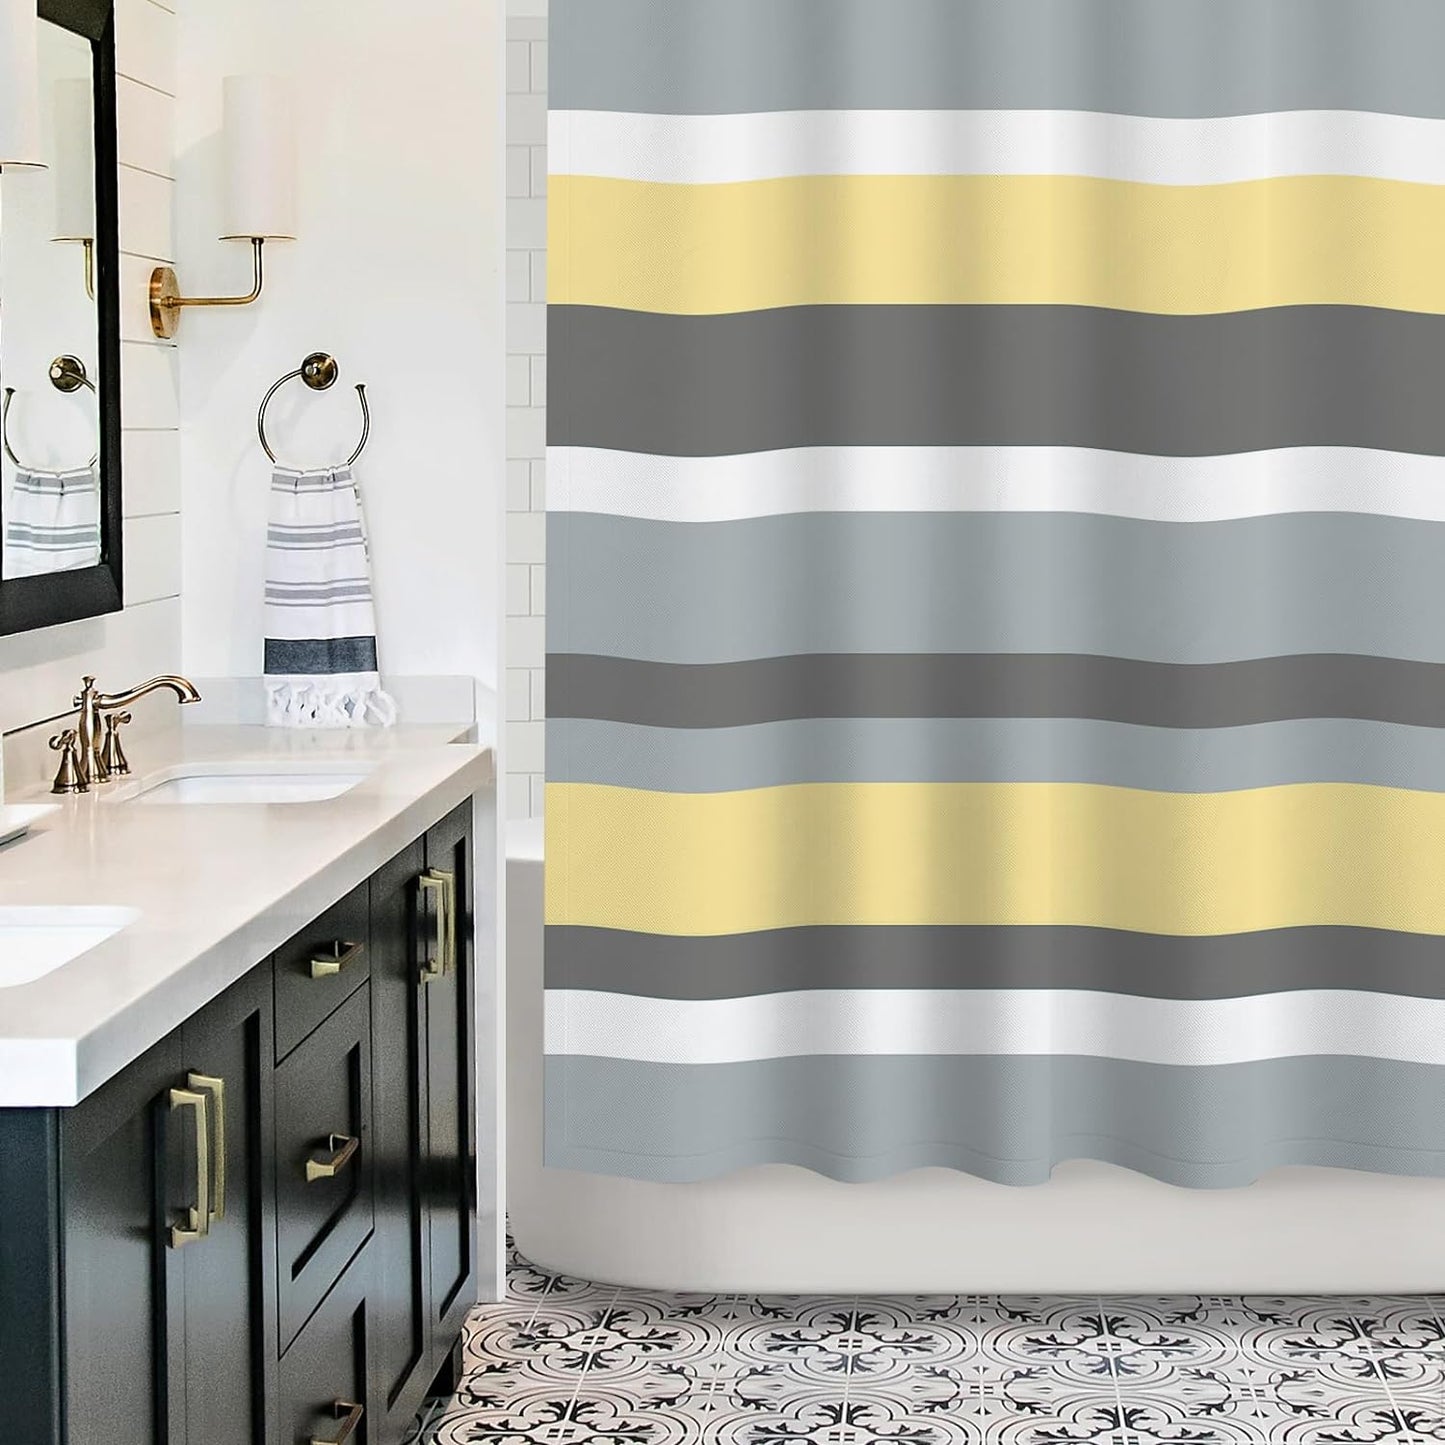 Sunlit Aqua Blue Gray Horizontal Stripes Water-Repellent Fabric Shower Curtain with Reinforced Metal Grommets Refreshing Striped Design Bathroom Decor